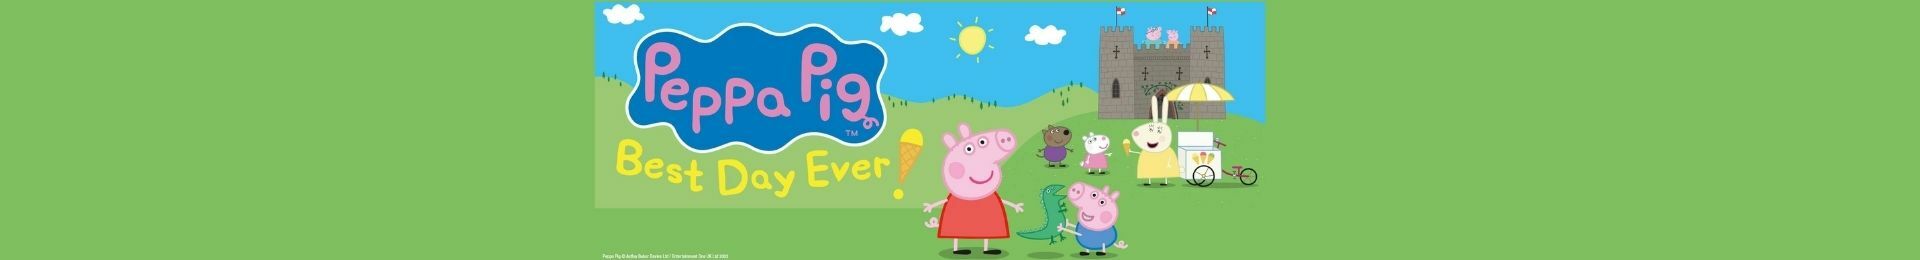 Peppa Pig's Best Day Ever banner image